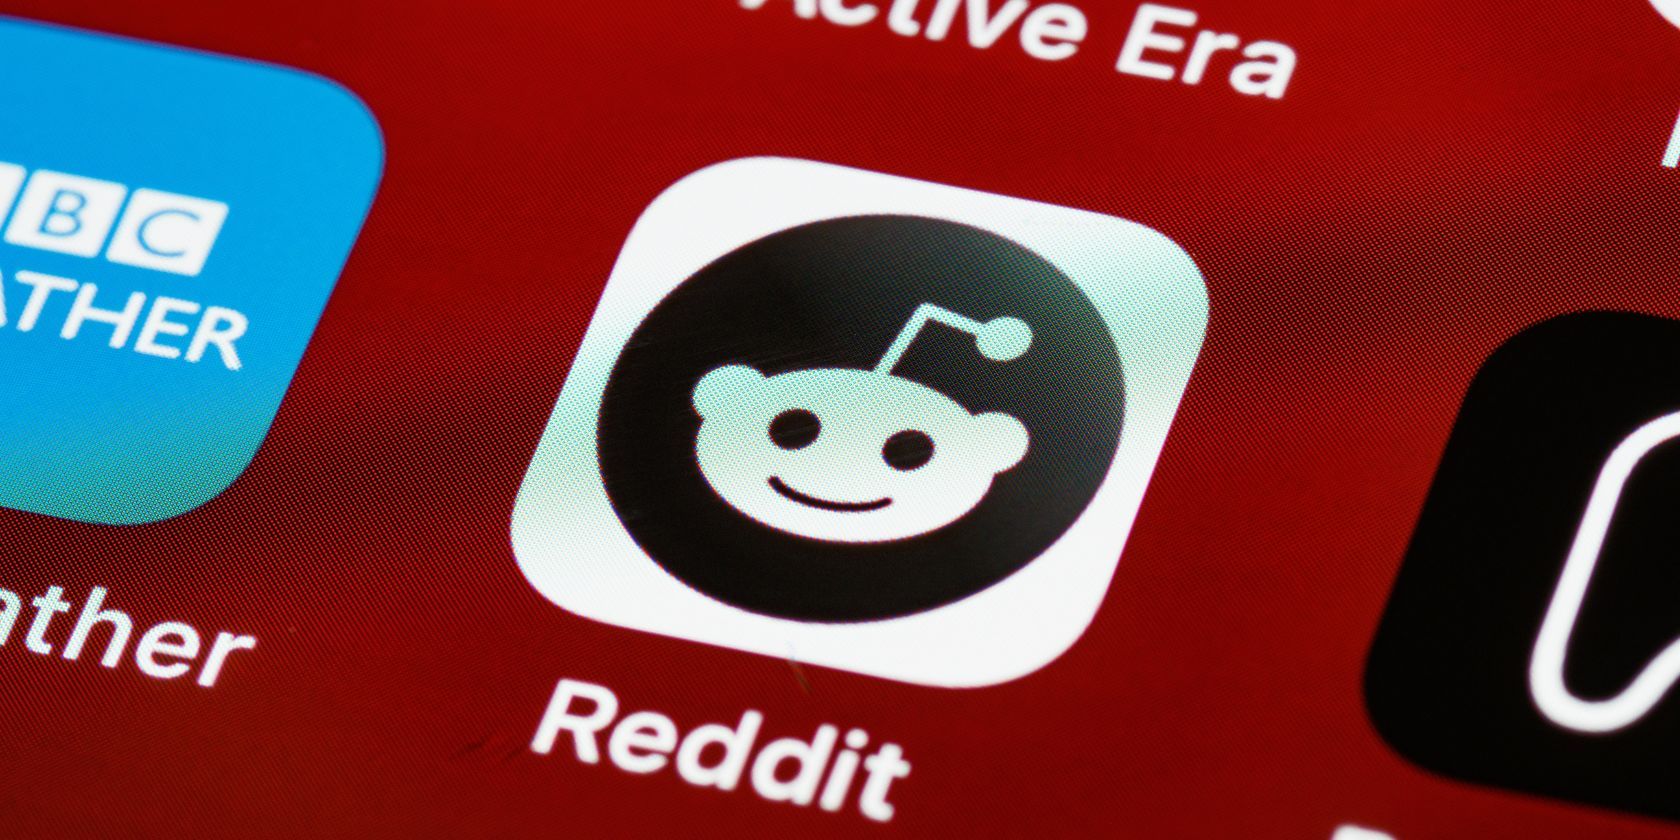 Reddit Gold: What It Is, Benefits & How To Get It - Signals agency